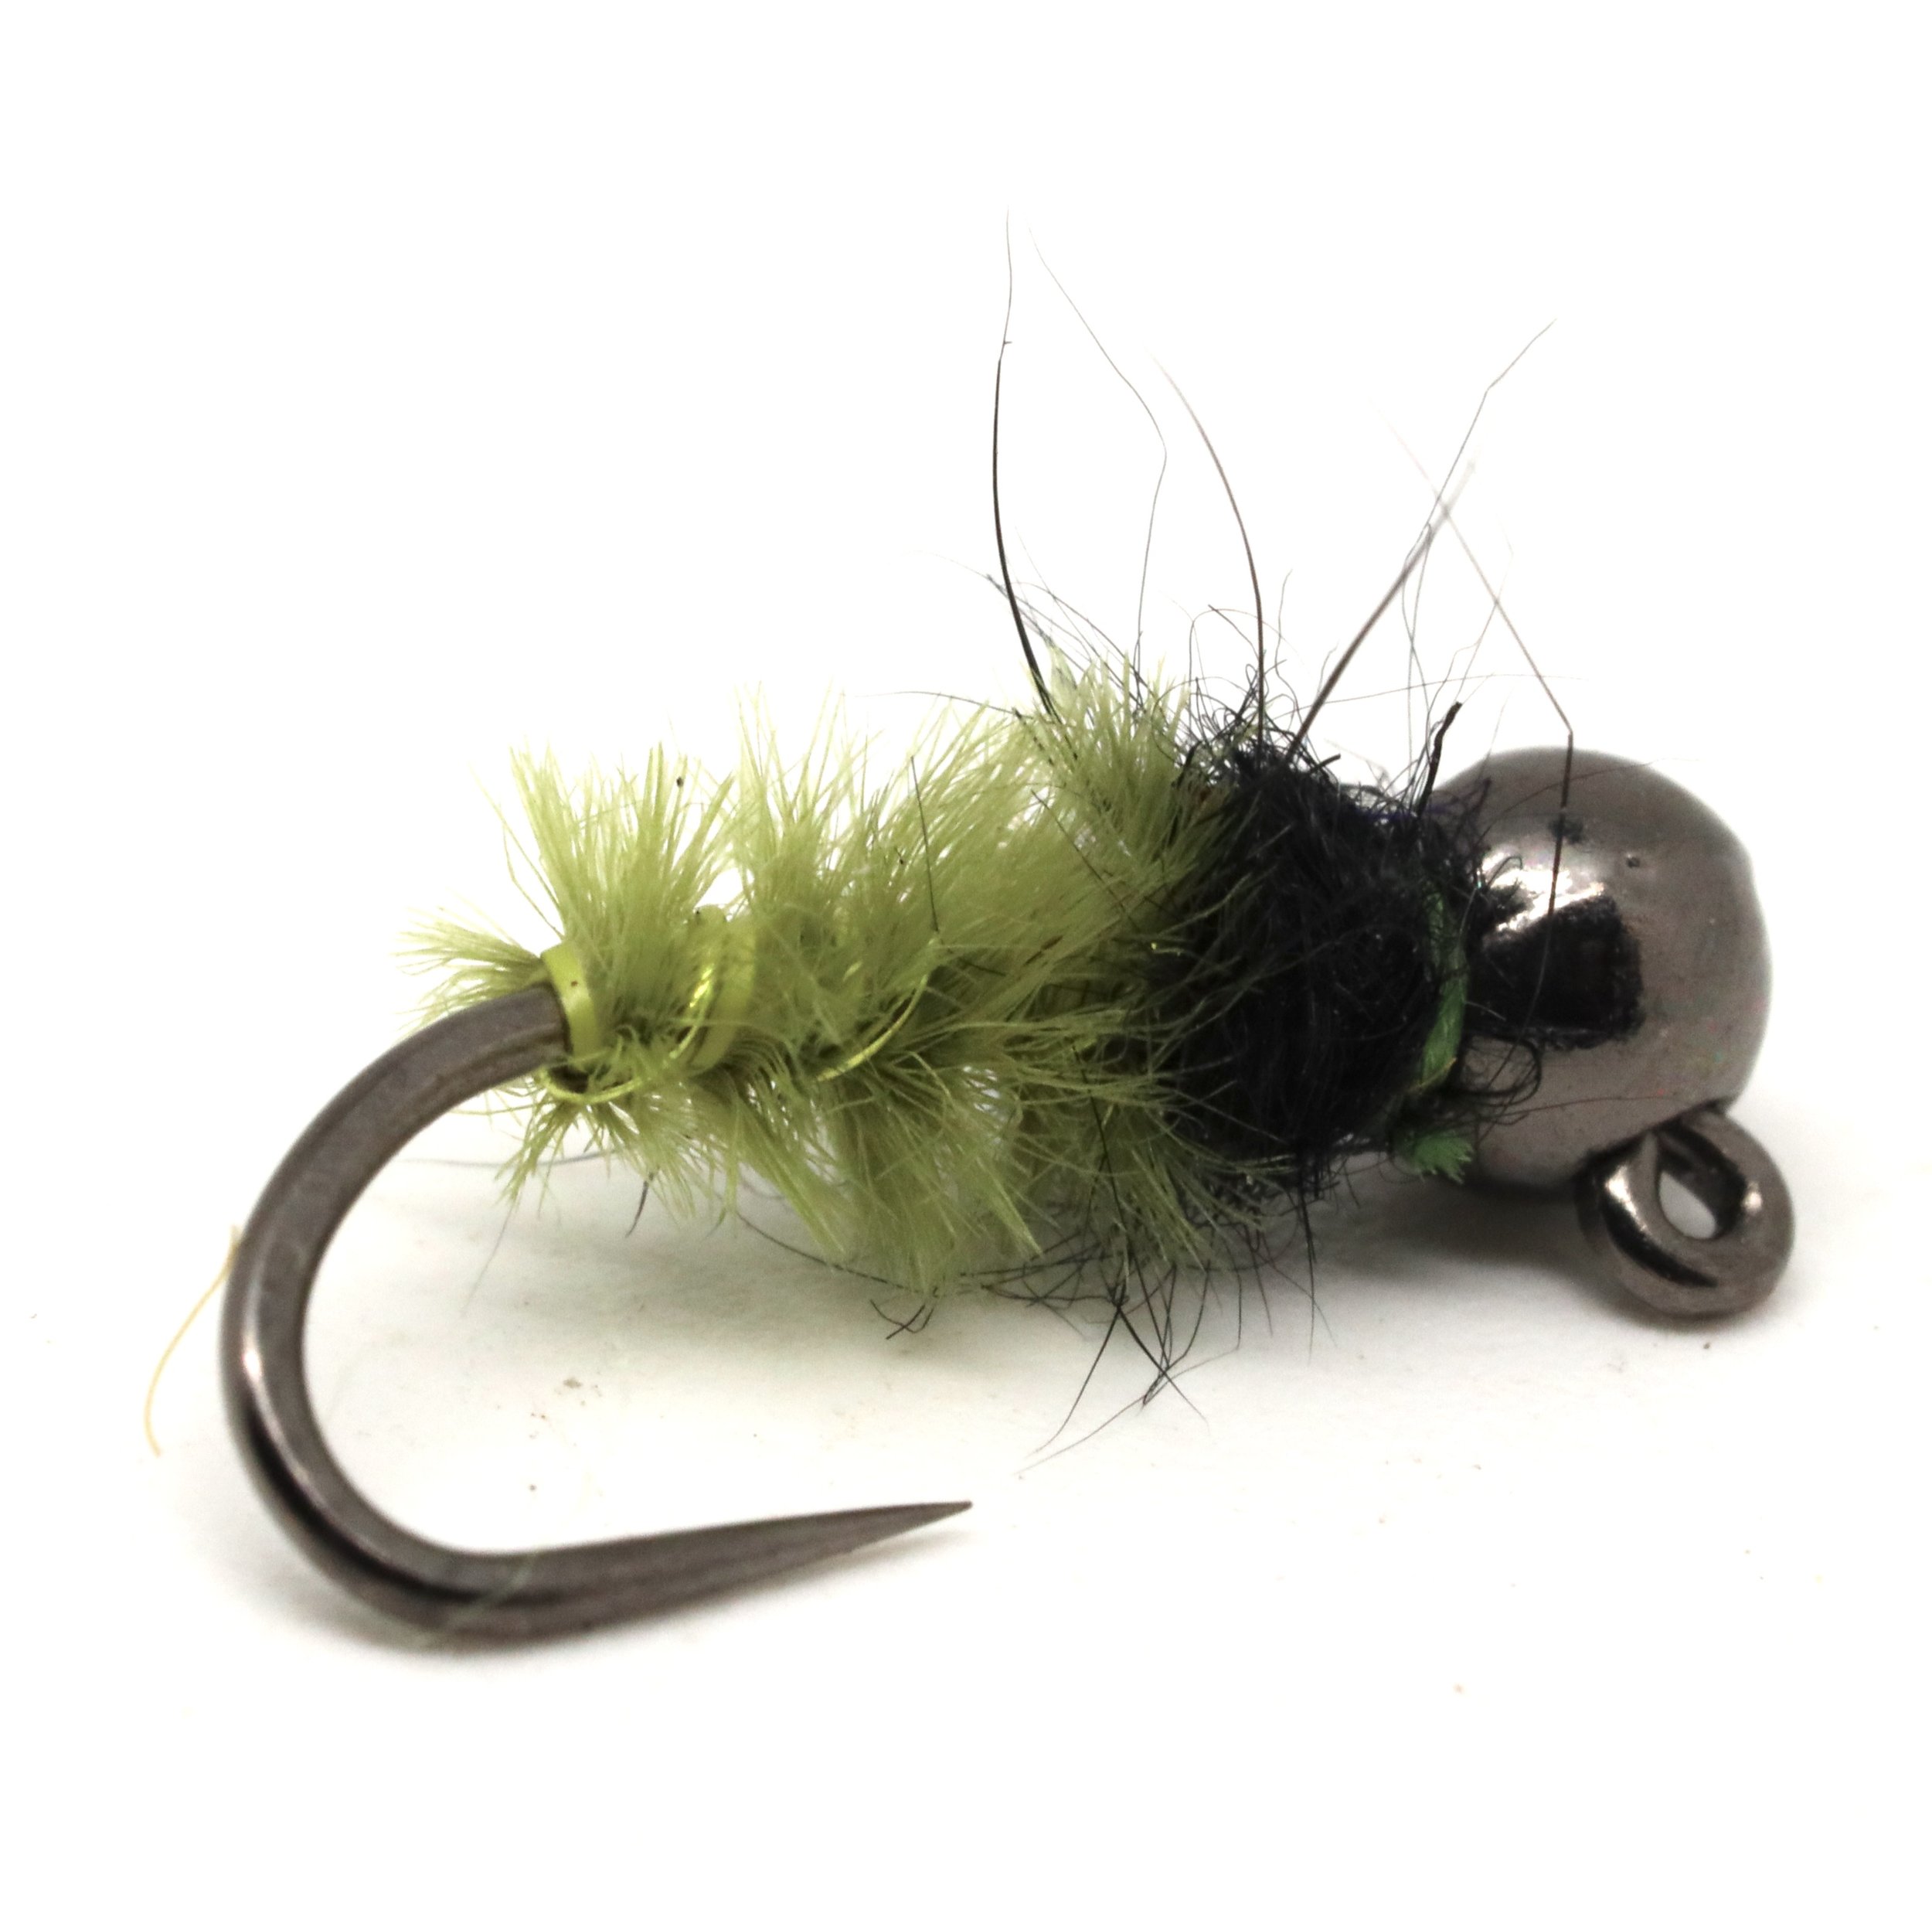 Hares ear parachute dry fly barbless hook. Low priced Uk trout flies..